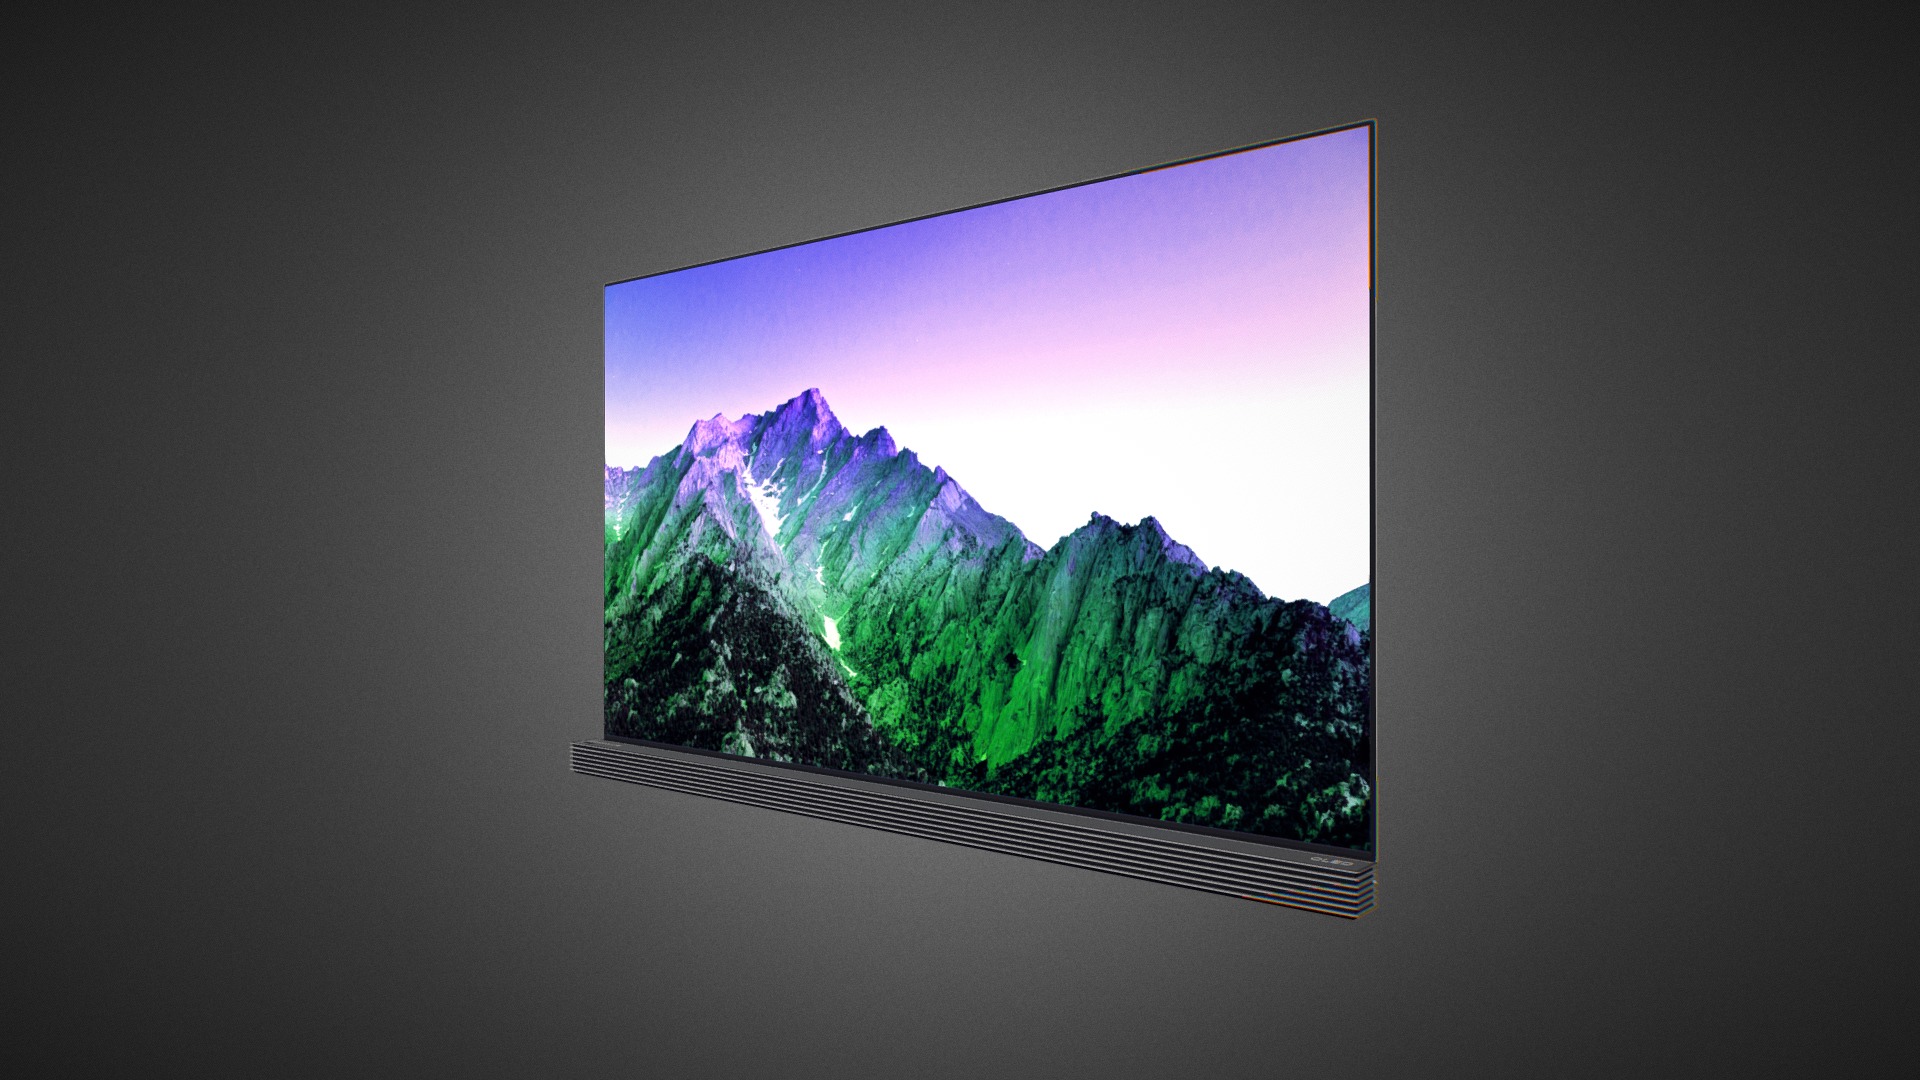 3D model LG OLED TV Signature 65 for Element 3D - This is a 3D model of the LG OLED TV Signature 65 for Element 3D. The 3D model is about a computer screen with a mountain.